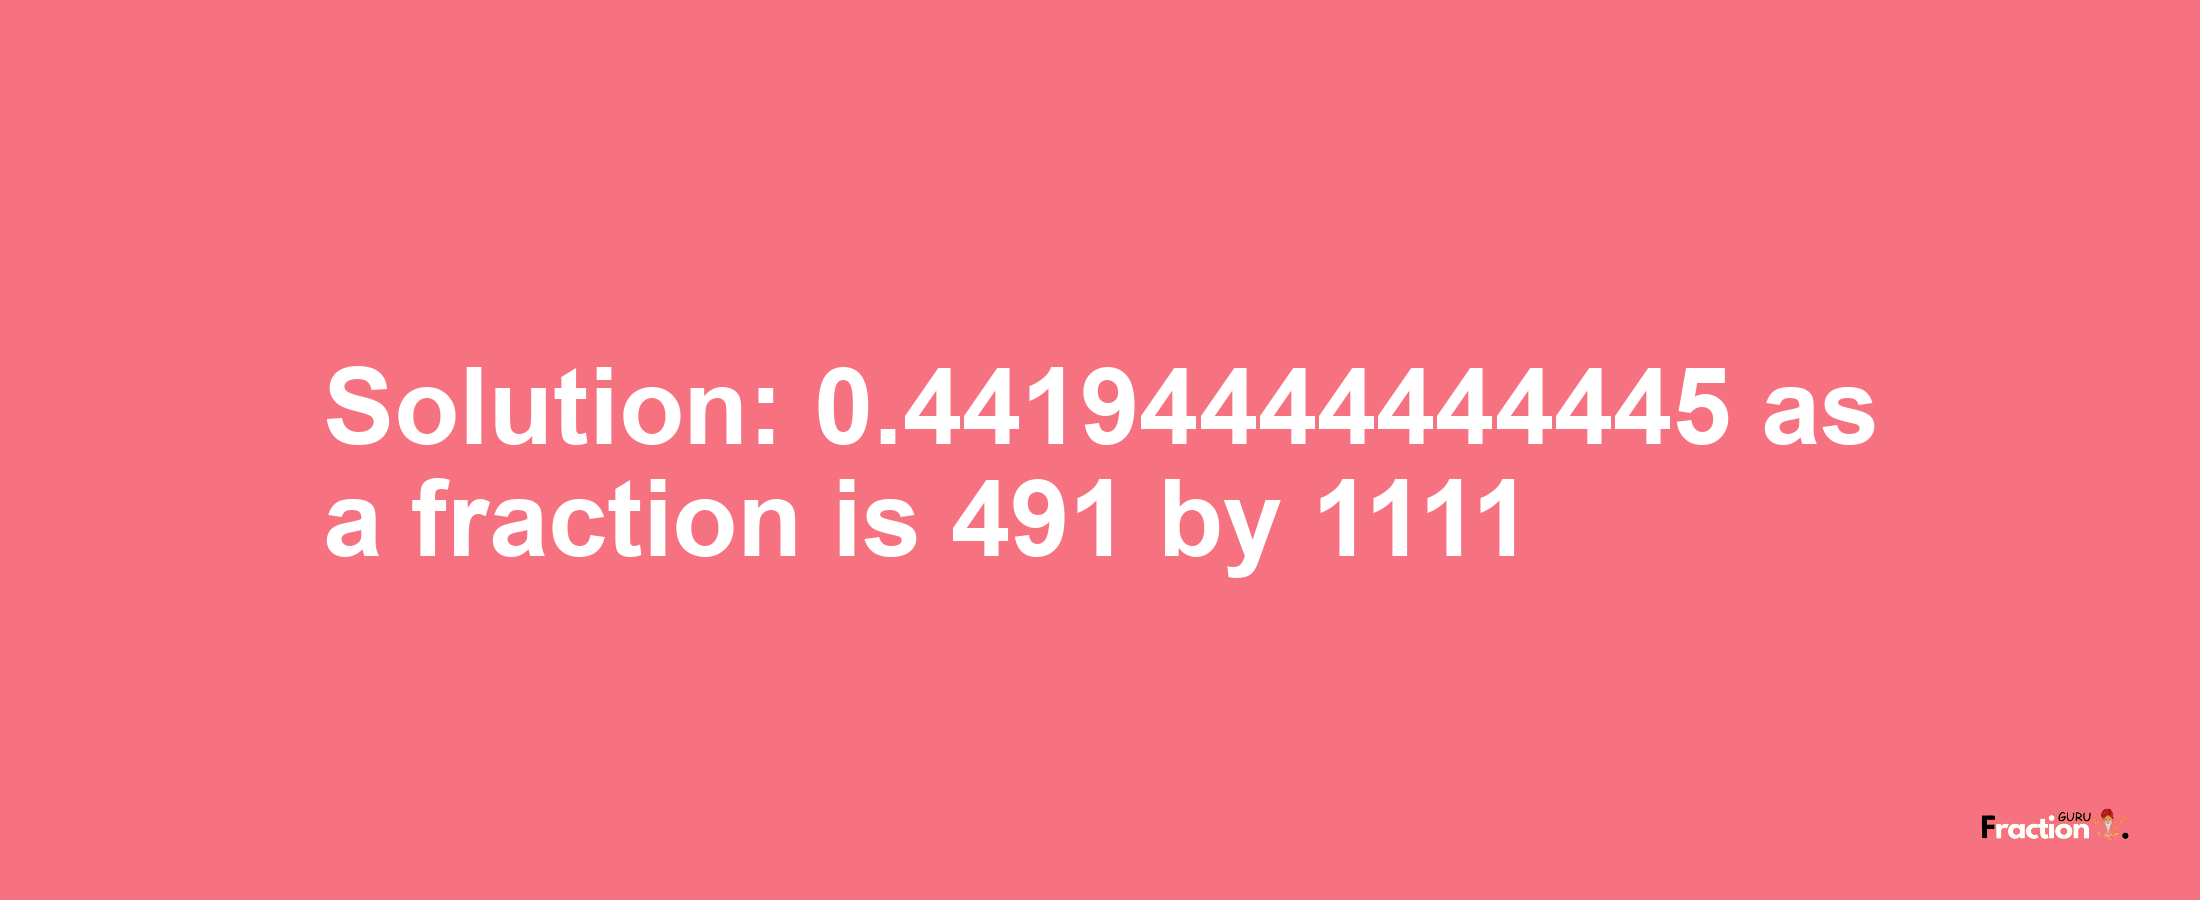 Solution:0.44194444444445 as a fraction is 491/1111